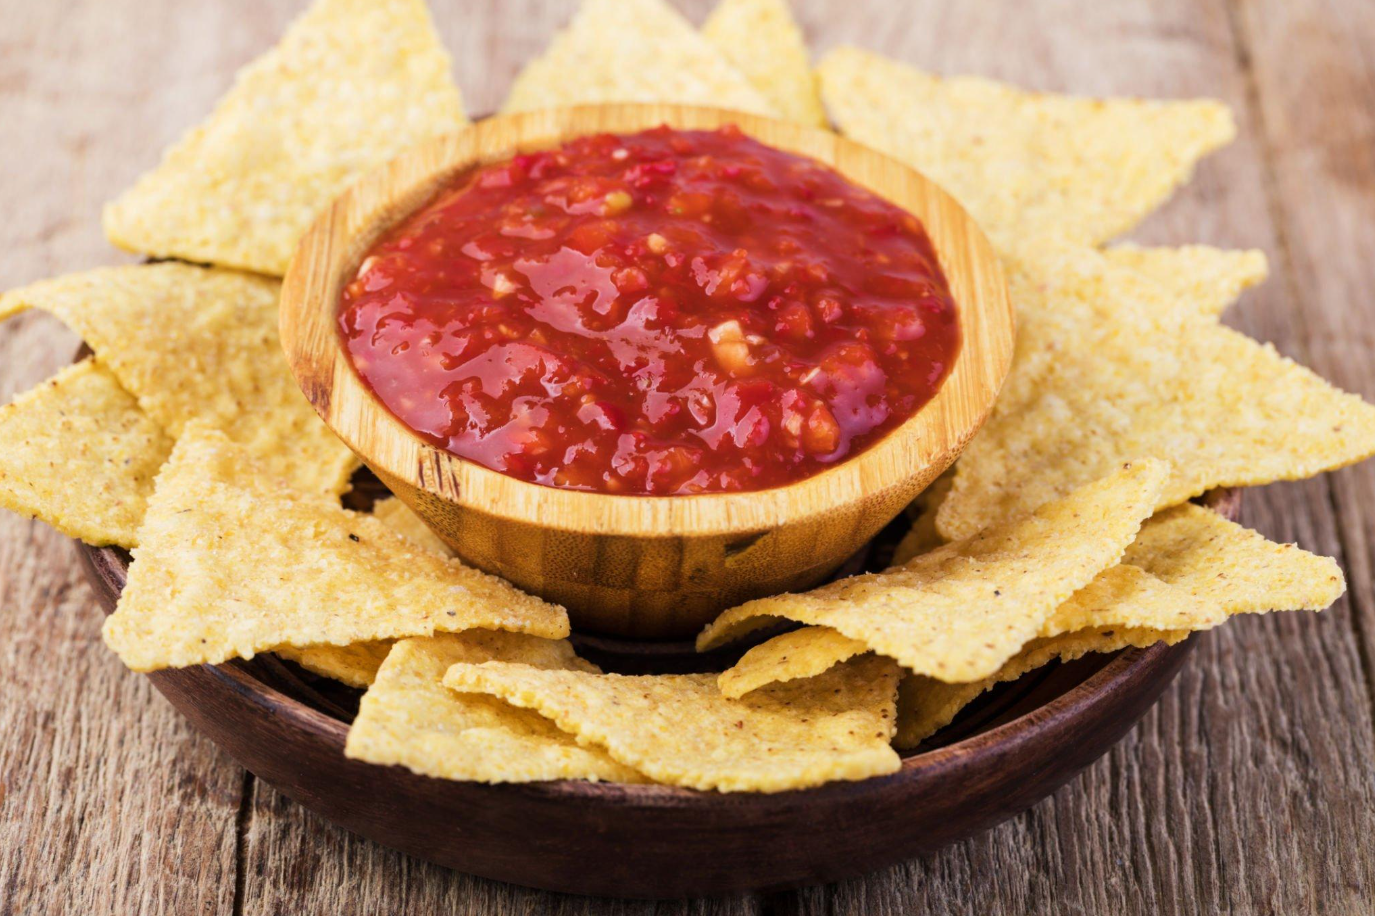 Serving fresh salsa with a clean spoon to avoid cross-contamination.